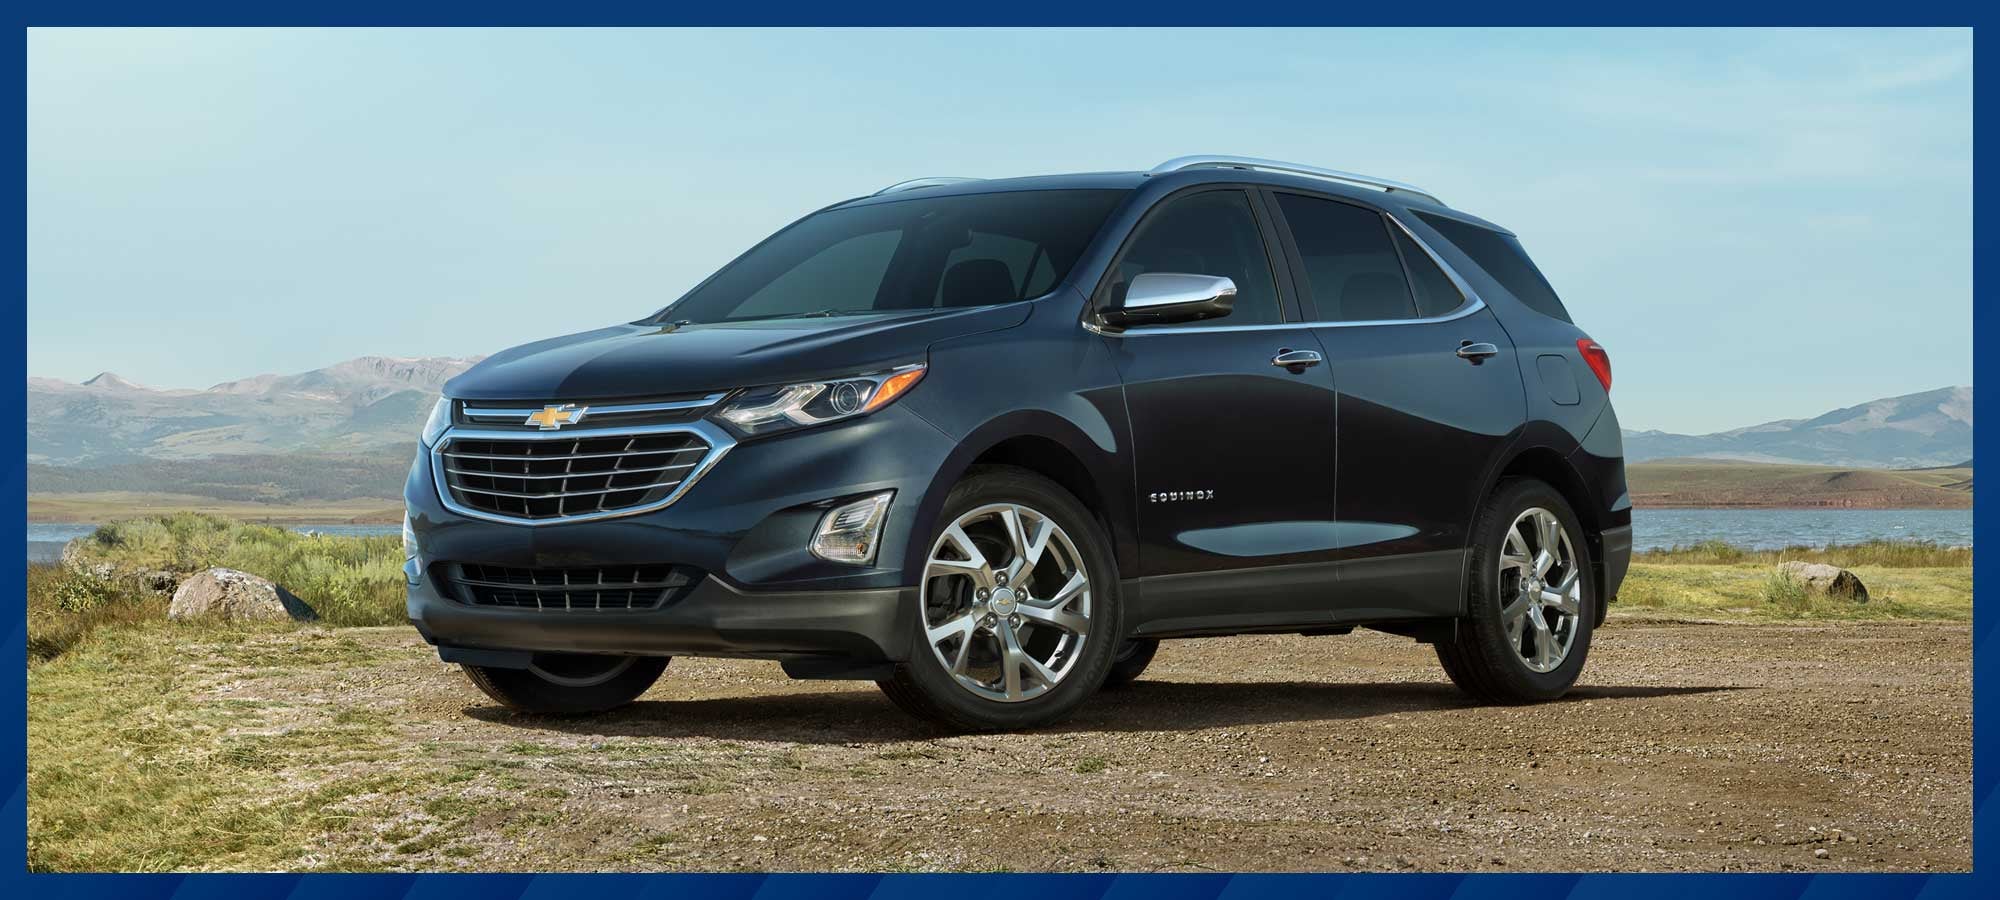 Used Chevy Equinox in Prince Frederick, MD